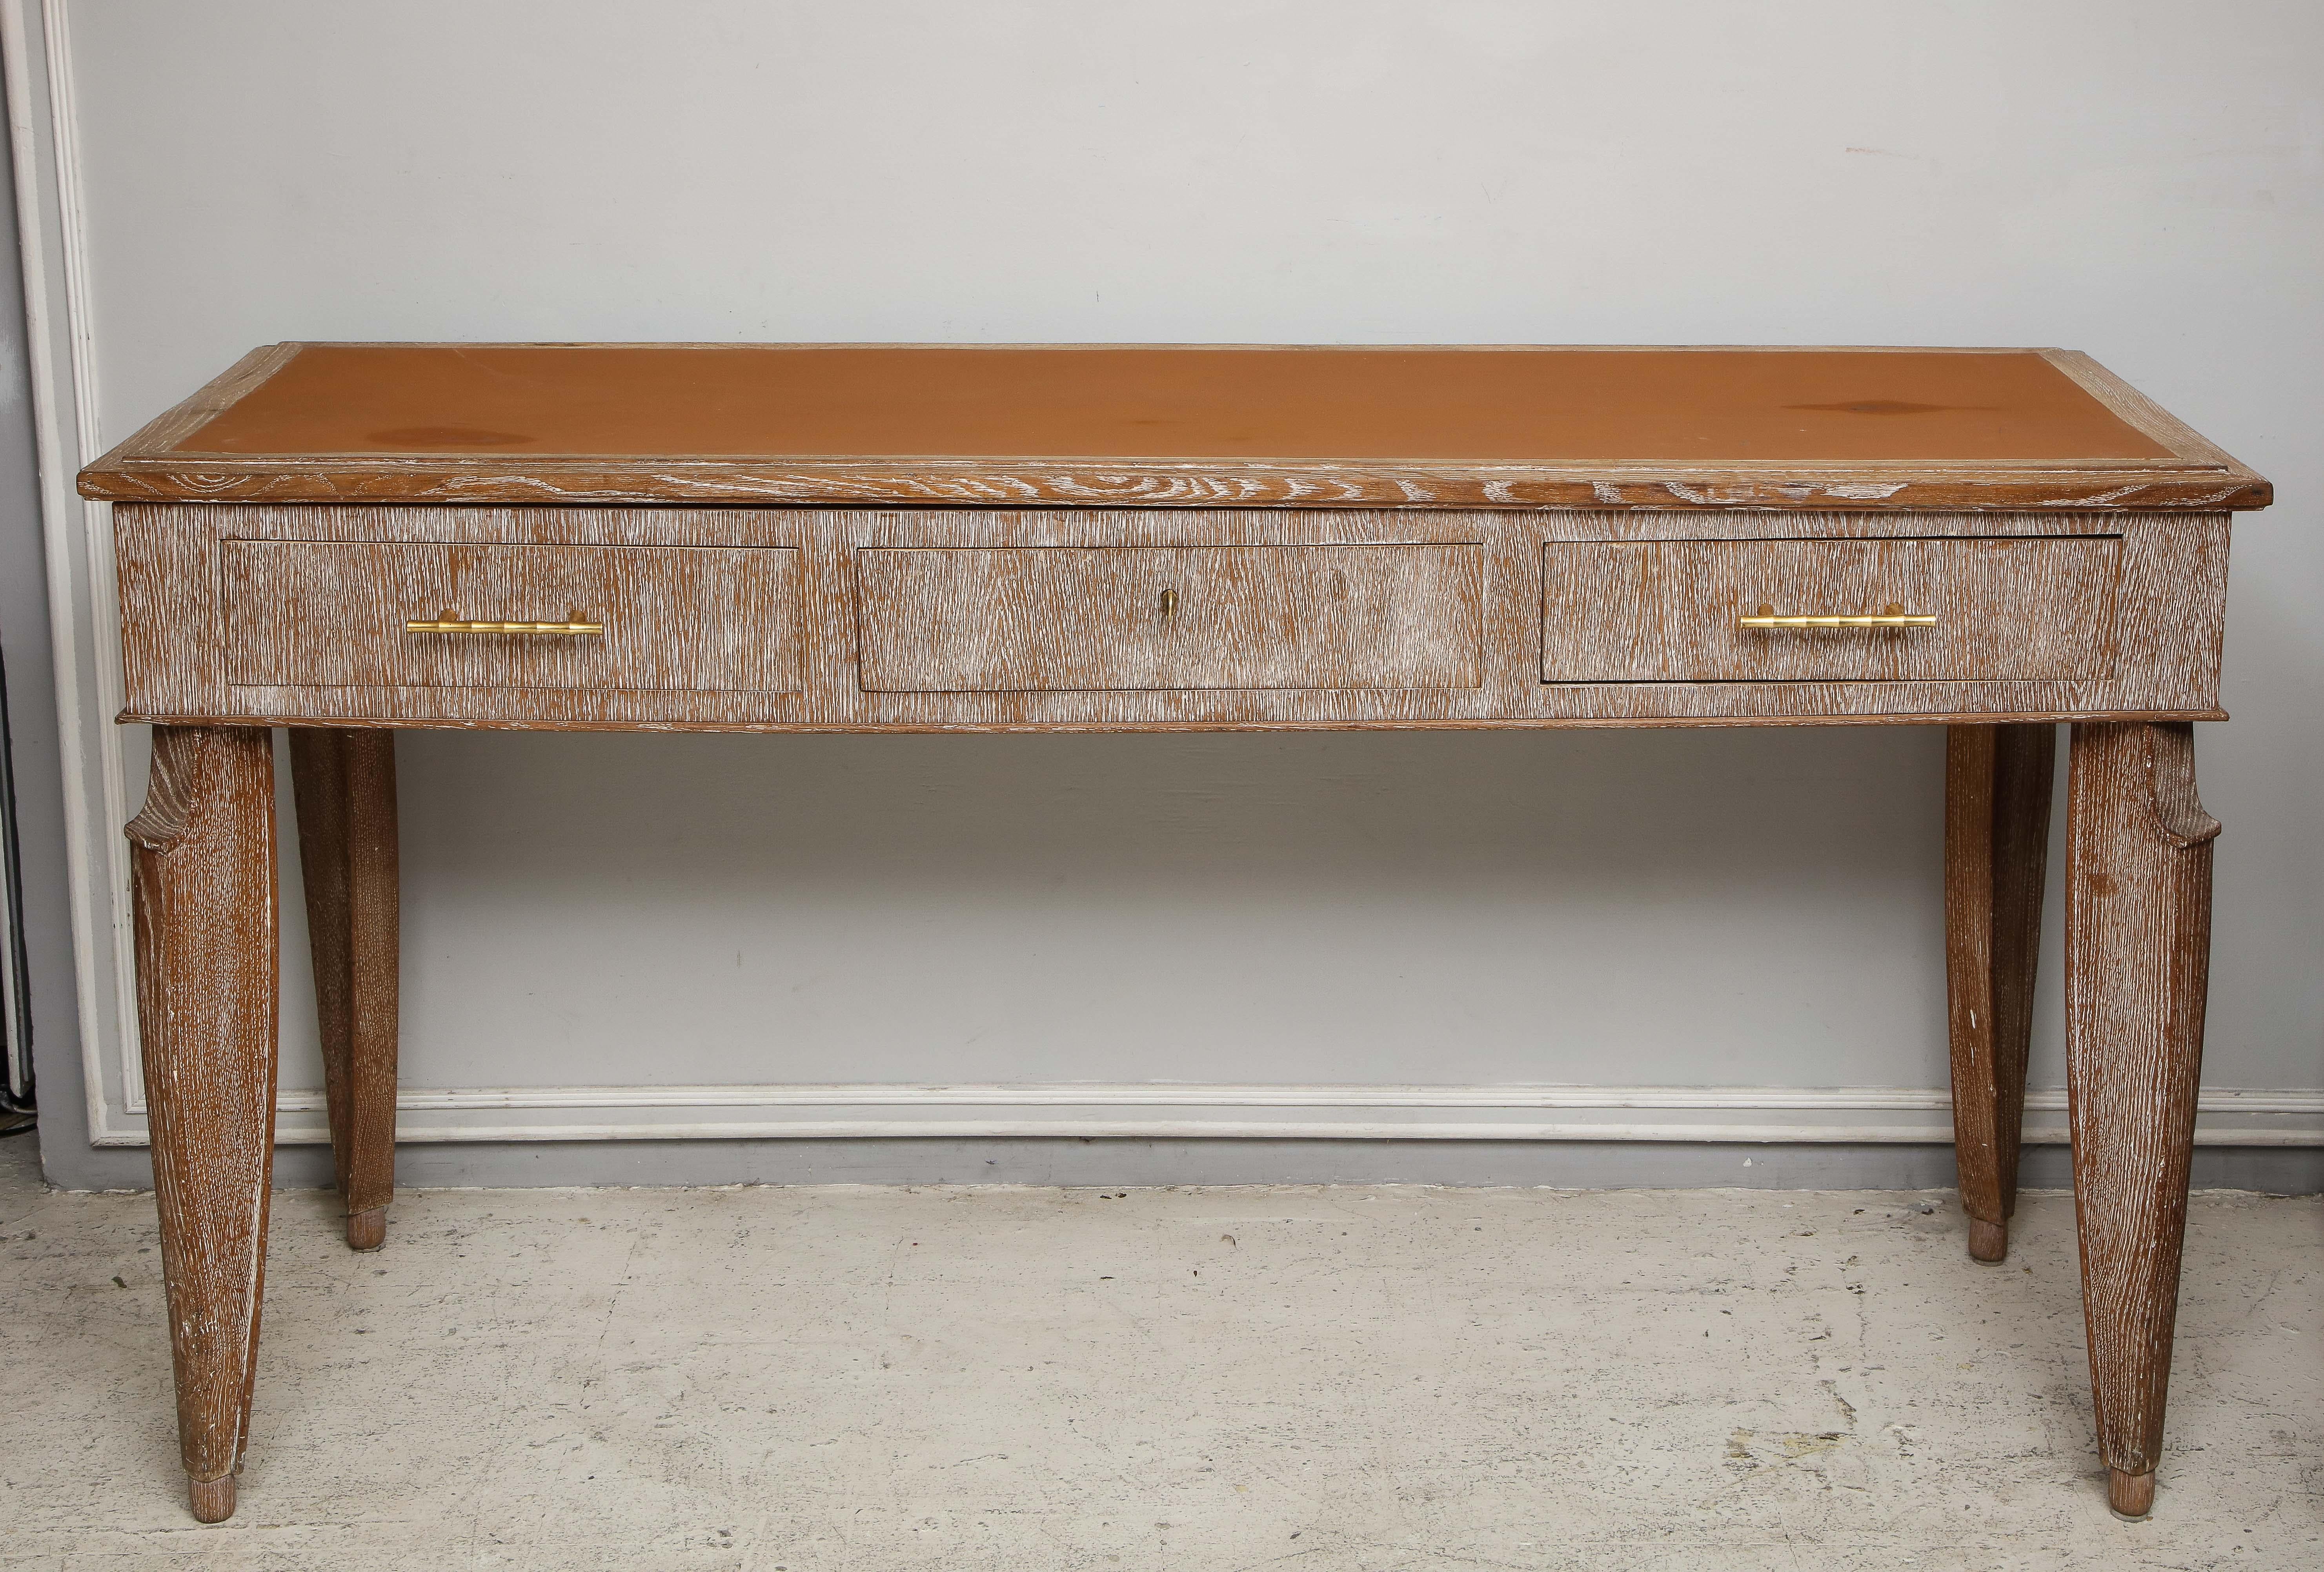 An unusual cerused oak console with leather top. The console consists of three central drawers, two drawers feature brass faux-bamboo hardware.